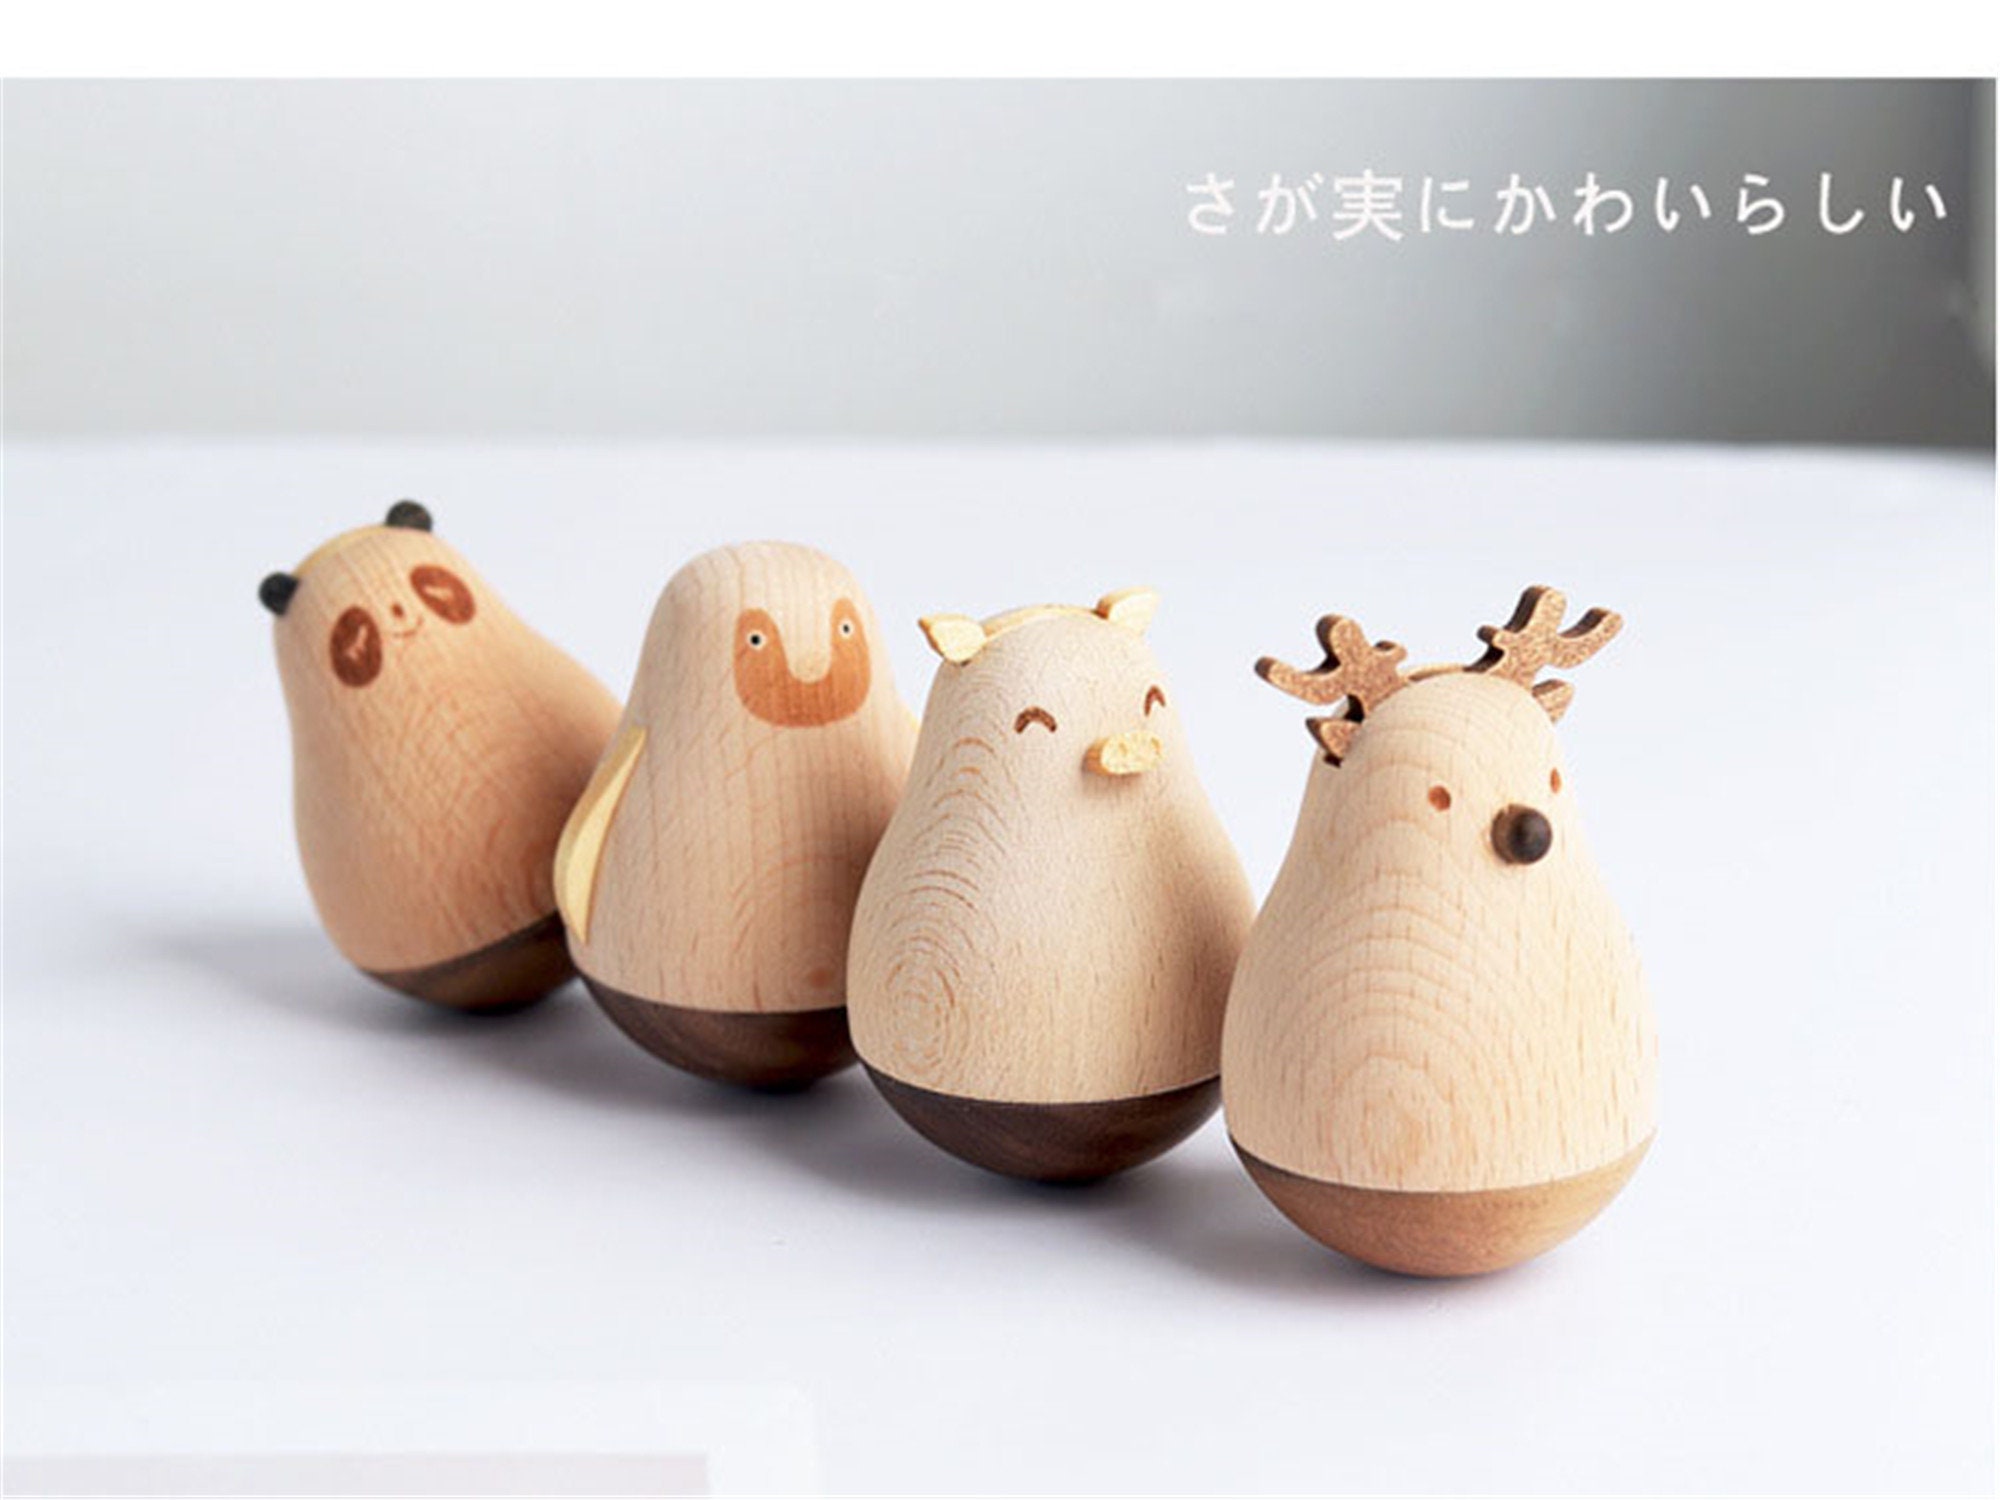 Qianly Mini Tumbler Toy Doll Tumbler Baby Toy Gifts Resin Statue Table  Centerpieces Cartoon Animal Tumbler Toy Cute Tumbler Desktop Decoration,  Deer